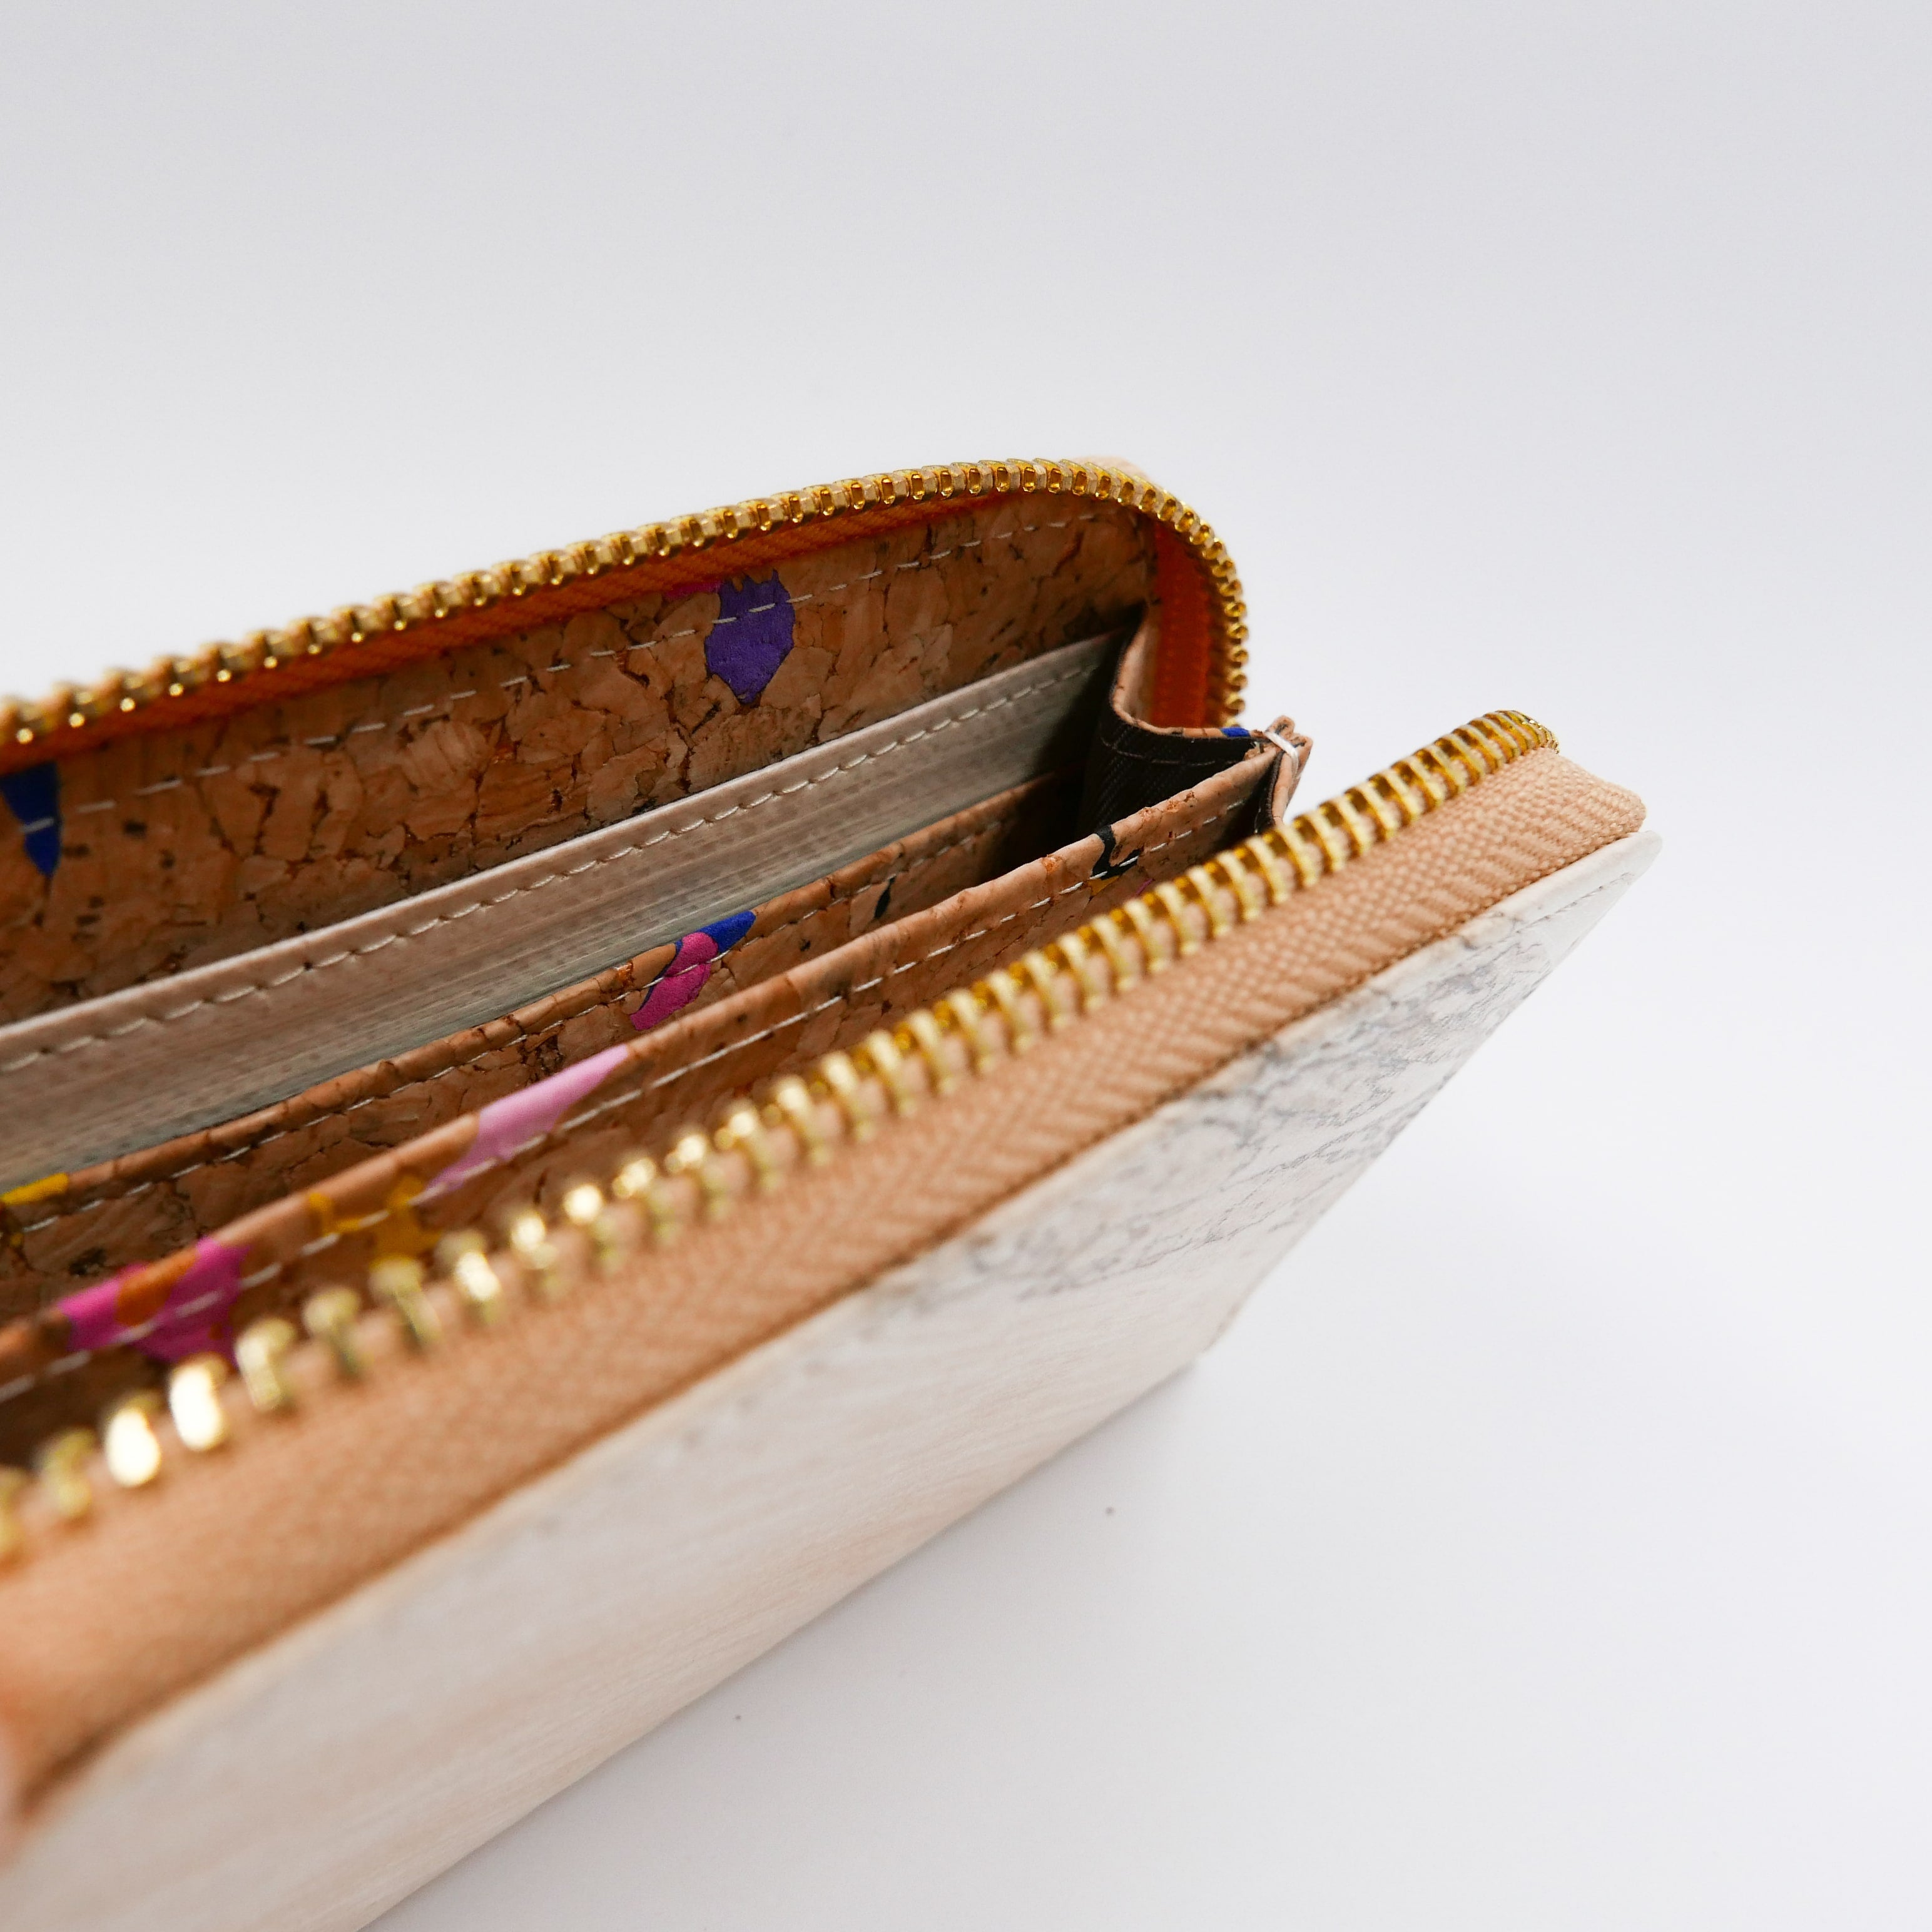 Handicraft sustainable and natural wallet from Asia. The wallet is made of natural, vegan and toxic-free banana tree and sold online on qacrafts.com.